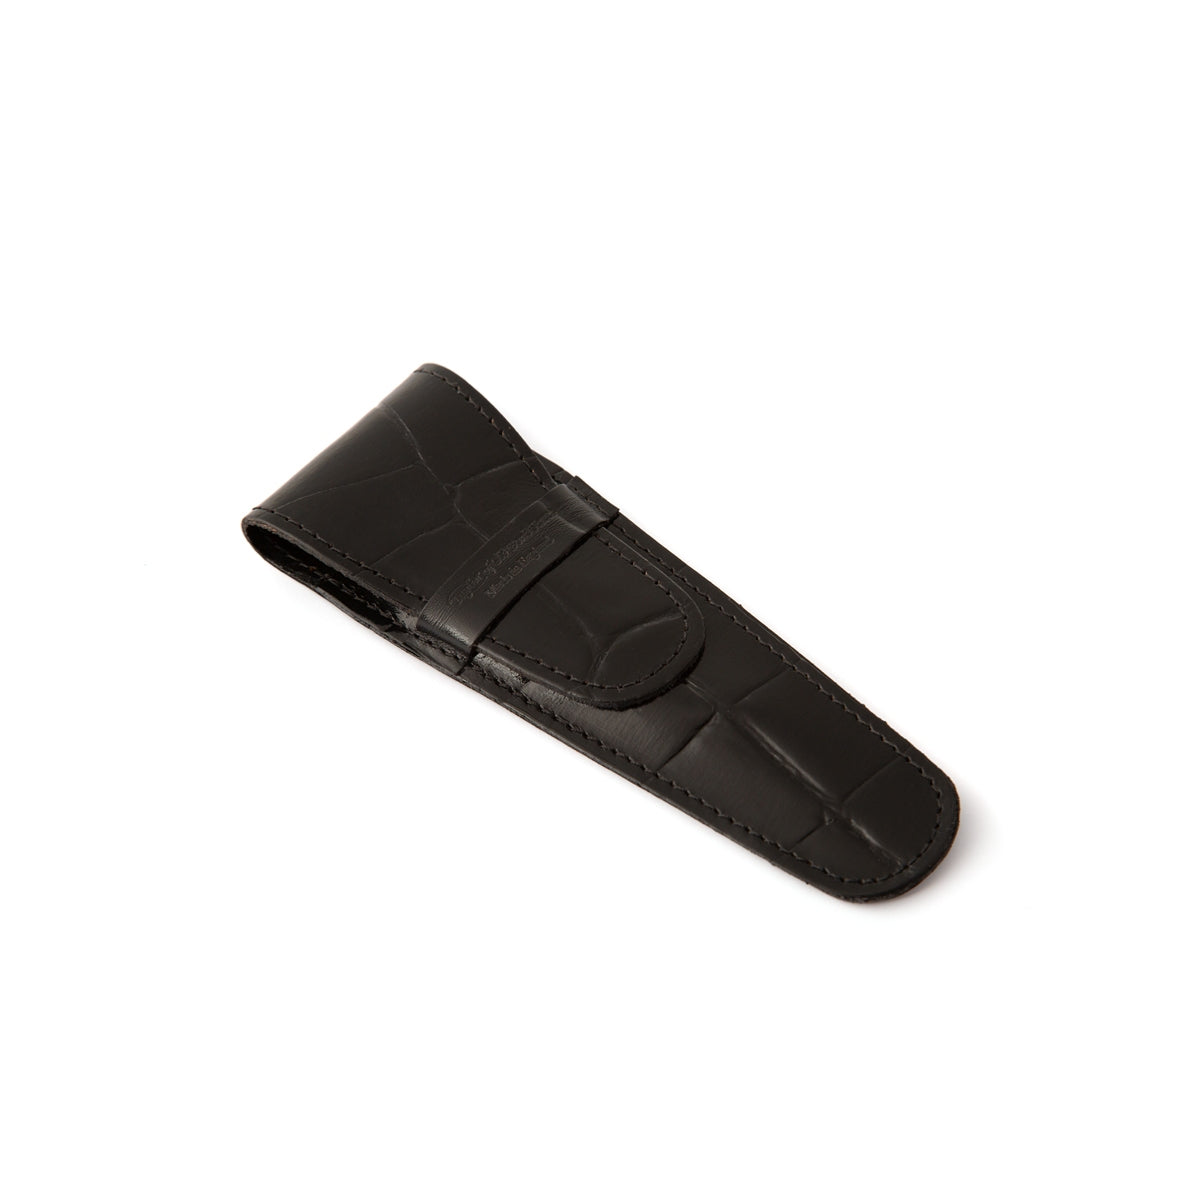 Black Leather Pouch for Mach3 or Fusion Razor